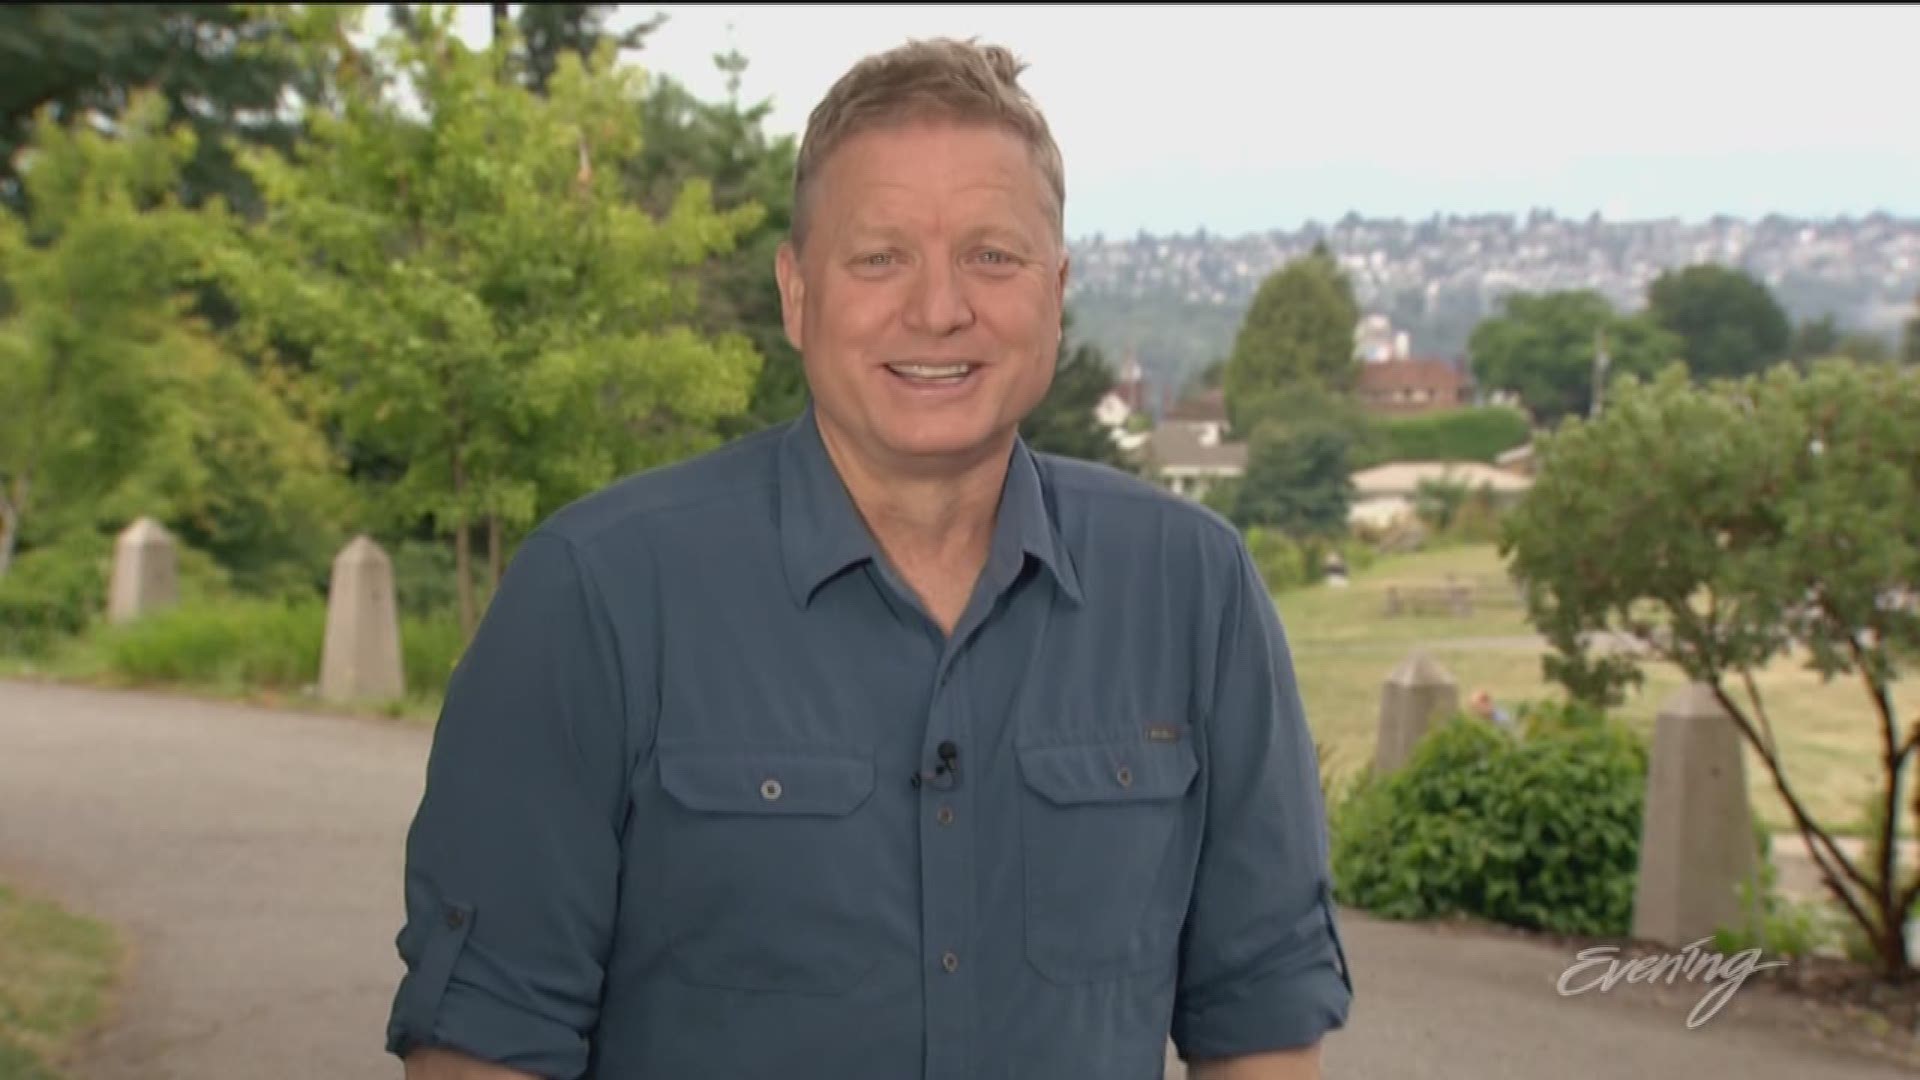 Jim Dever hosts the Welcome to My Neighborhood Special! FEATURING: Seattle - Sir Mix-A-Lot, Olympia - Governor Jay Inslee, Seattle - Luly Yang, Edmonds - Rick Steves, Tacoma - Marcus Trufant, Ravenna- Nancy Pearl, and West Seattle - Chris Ballew.